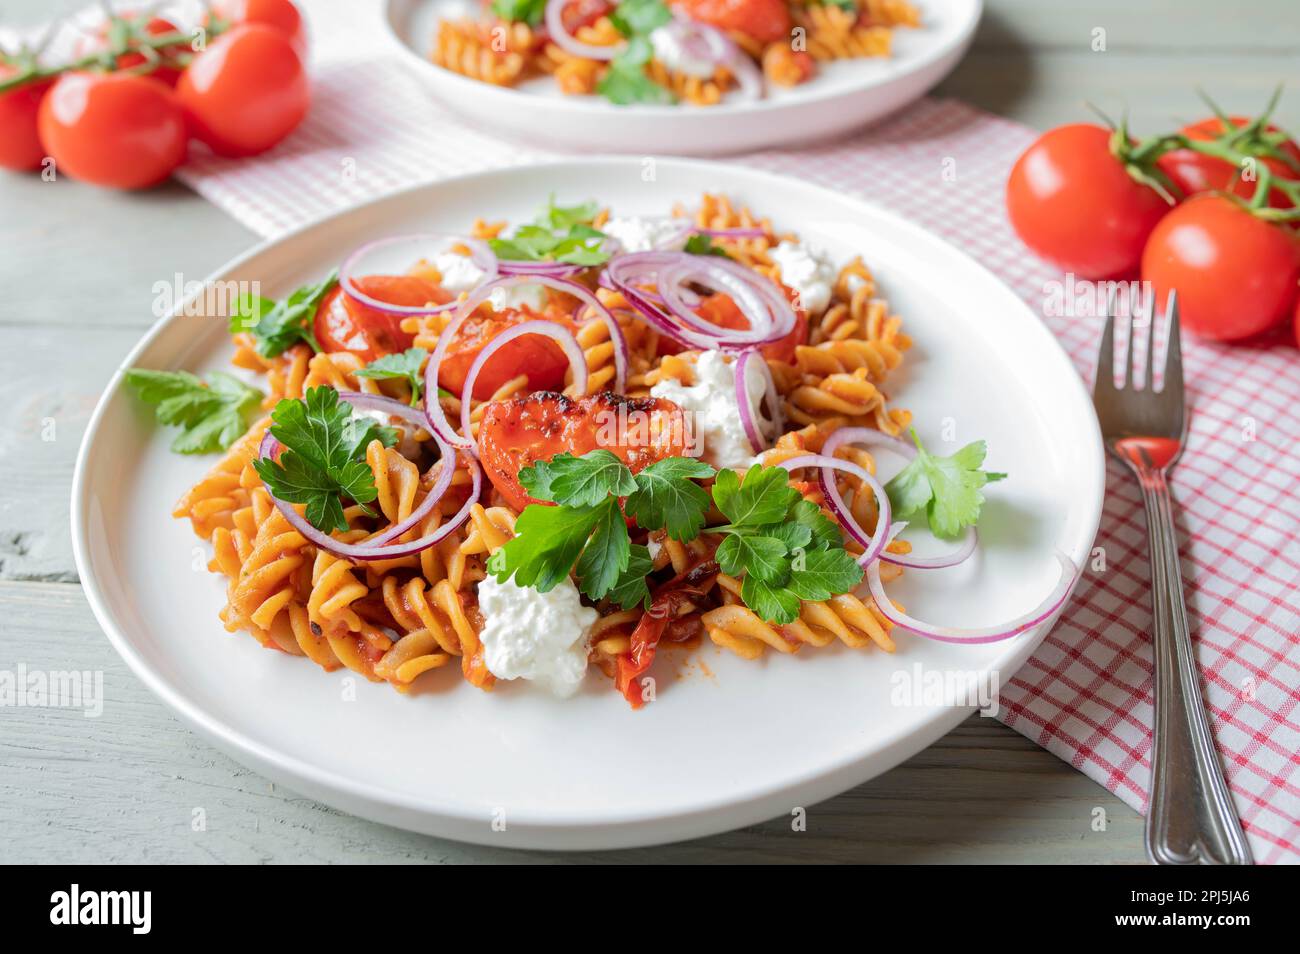 Fitness meal with whole grain pasta, vegetables and high protein cottage cheese on a plate Stock Photo